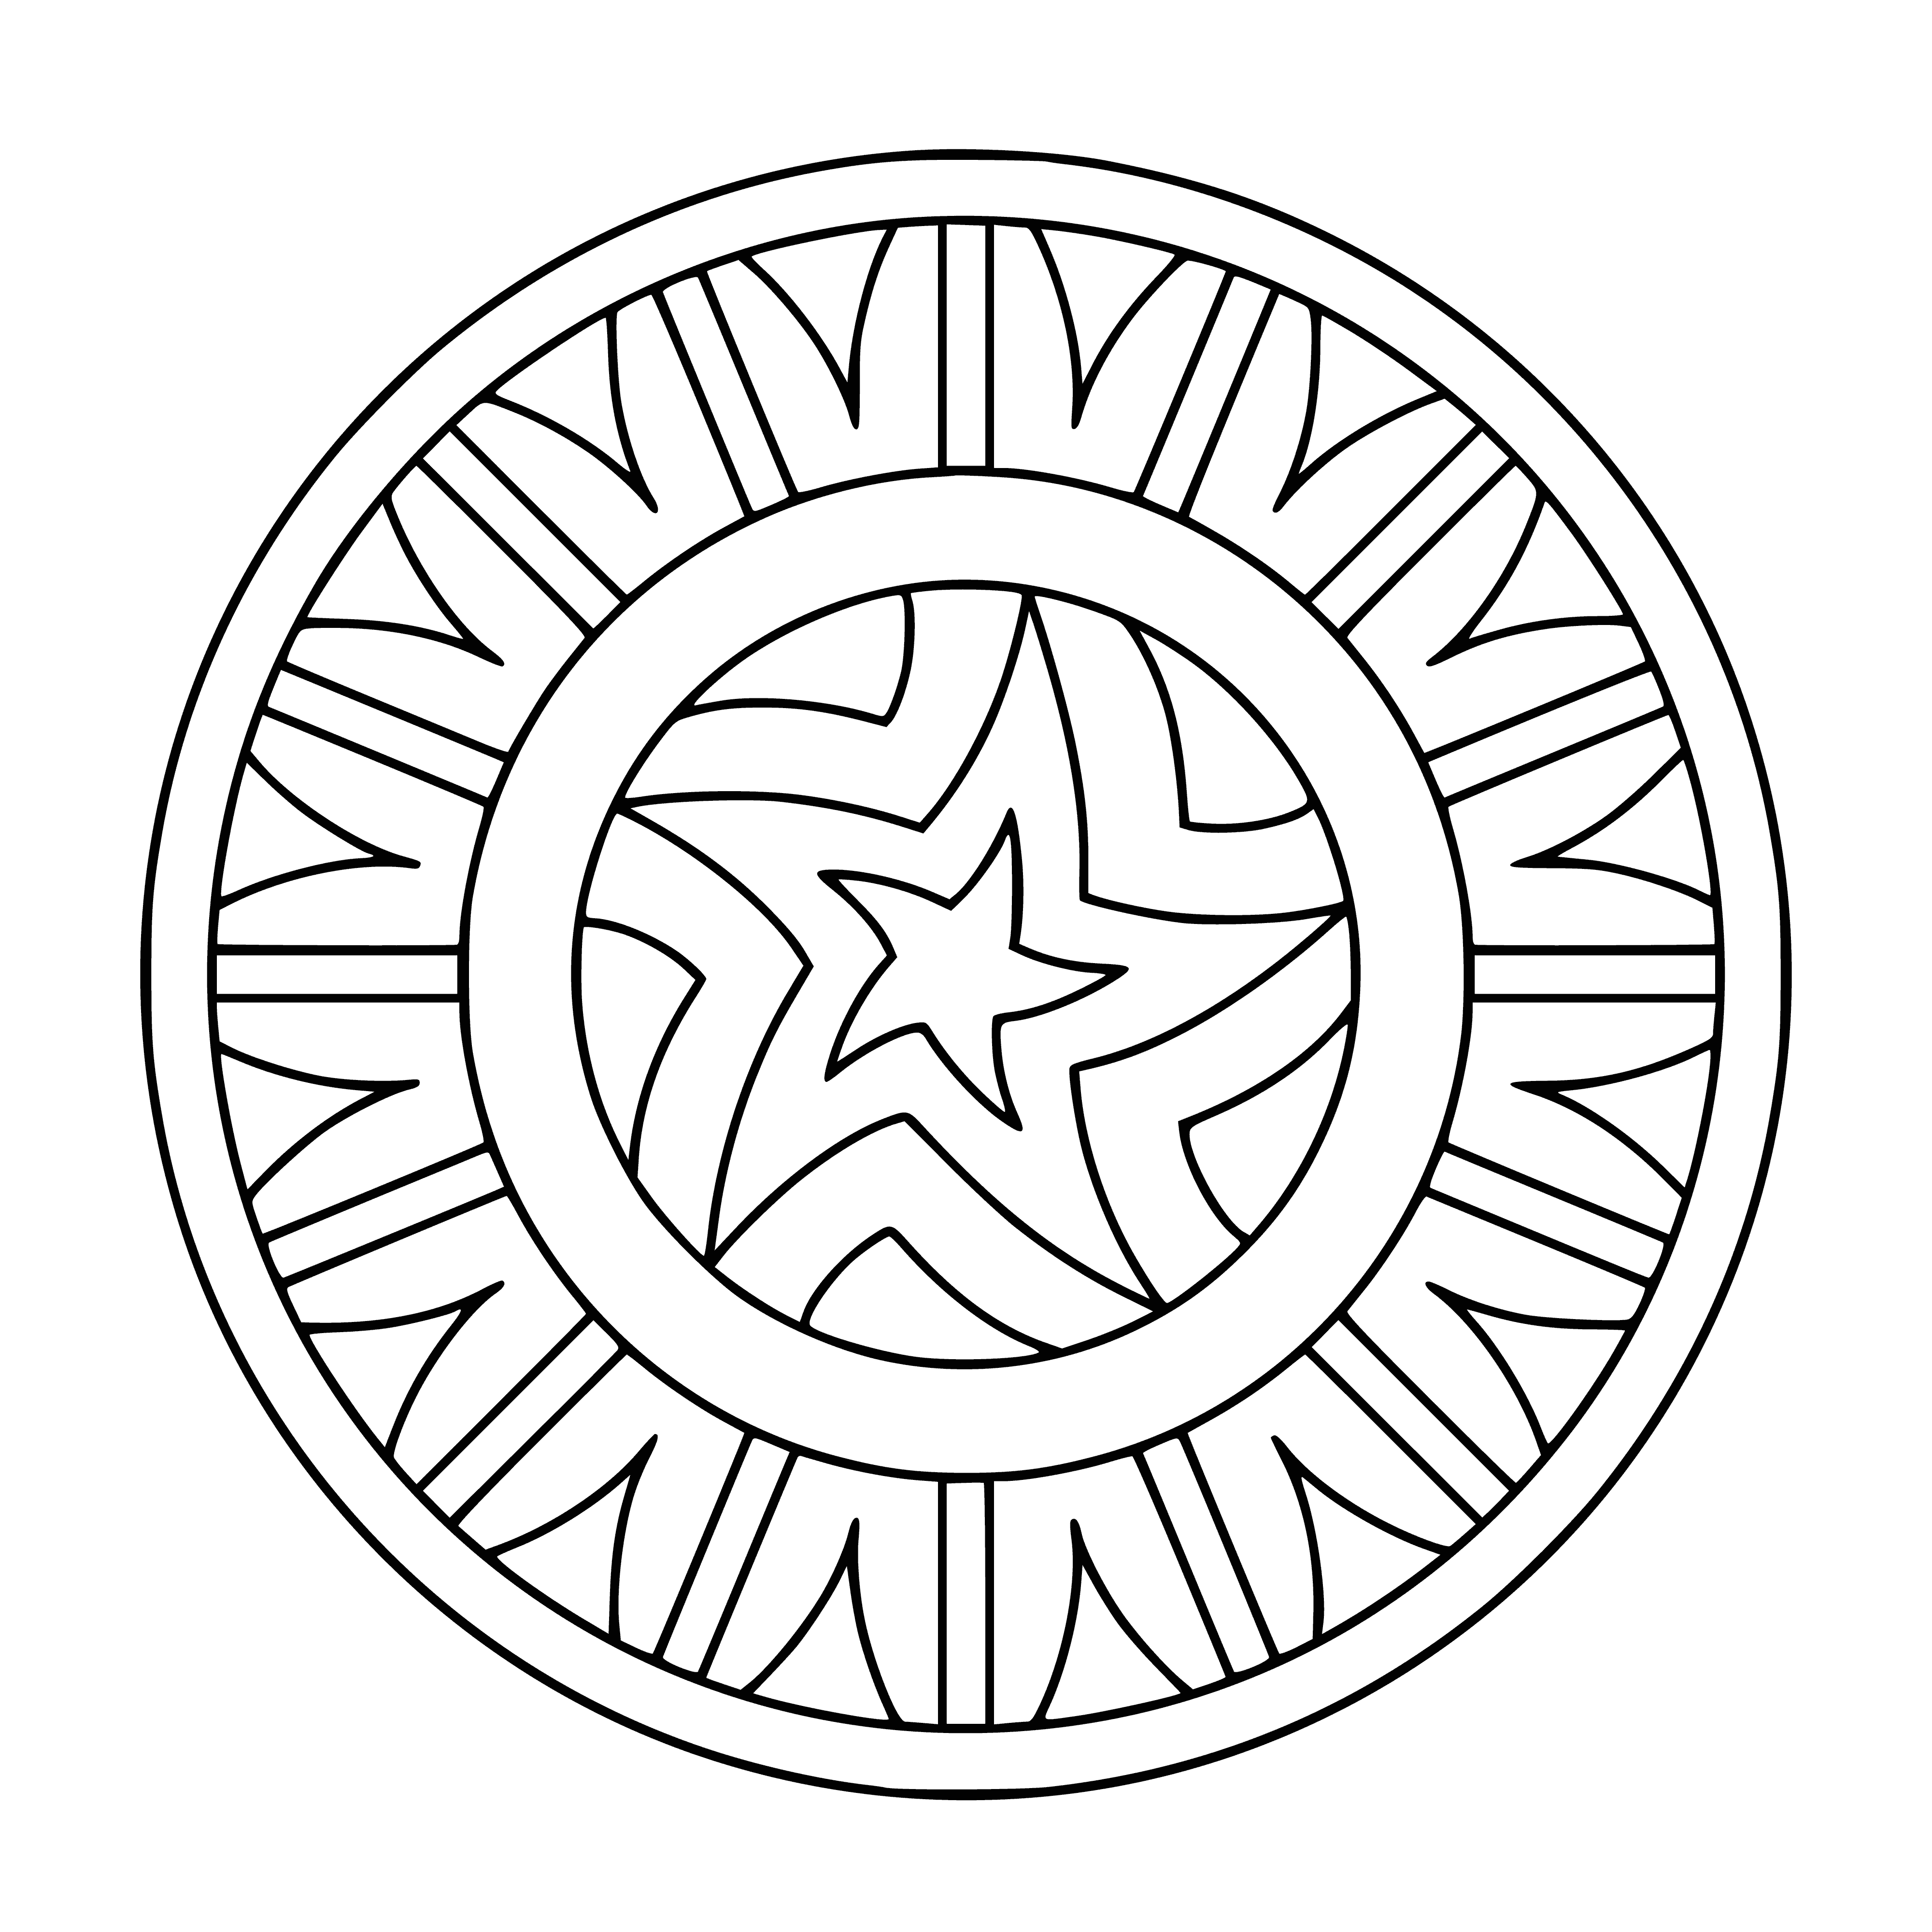 coloring page: Mandala coloring page of symmetrical design with flower in center & border of repeating geometric shapes on white background.